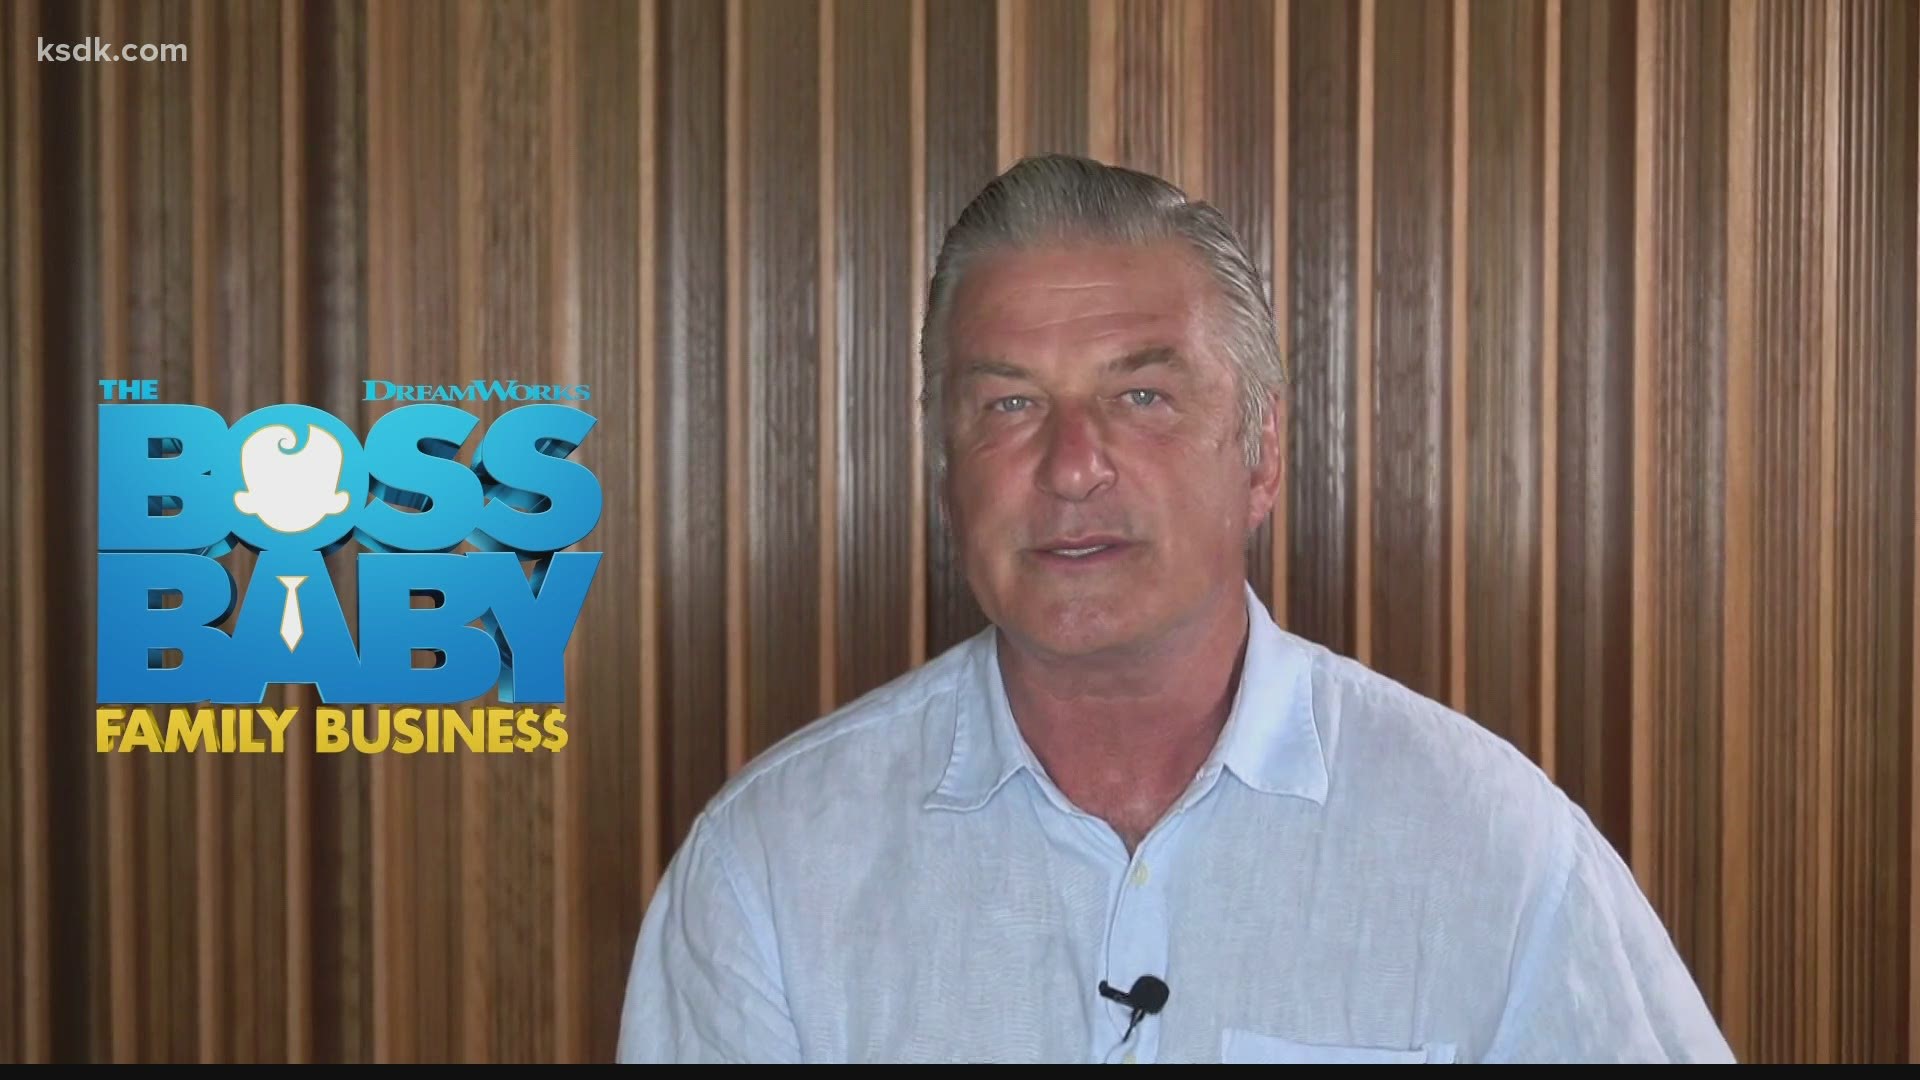 Alec Baldwin sat down with 5 On Your Side's Monica Adams to discuss the newest installment of the 'Boss Baby' franchise.